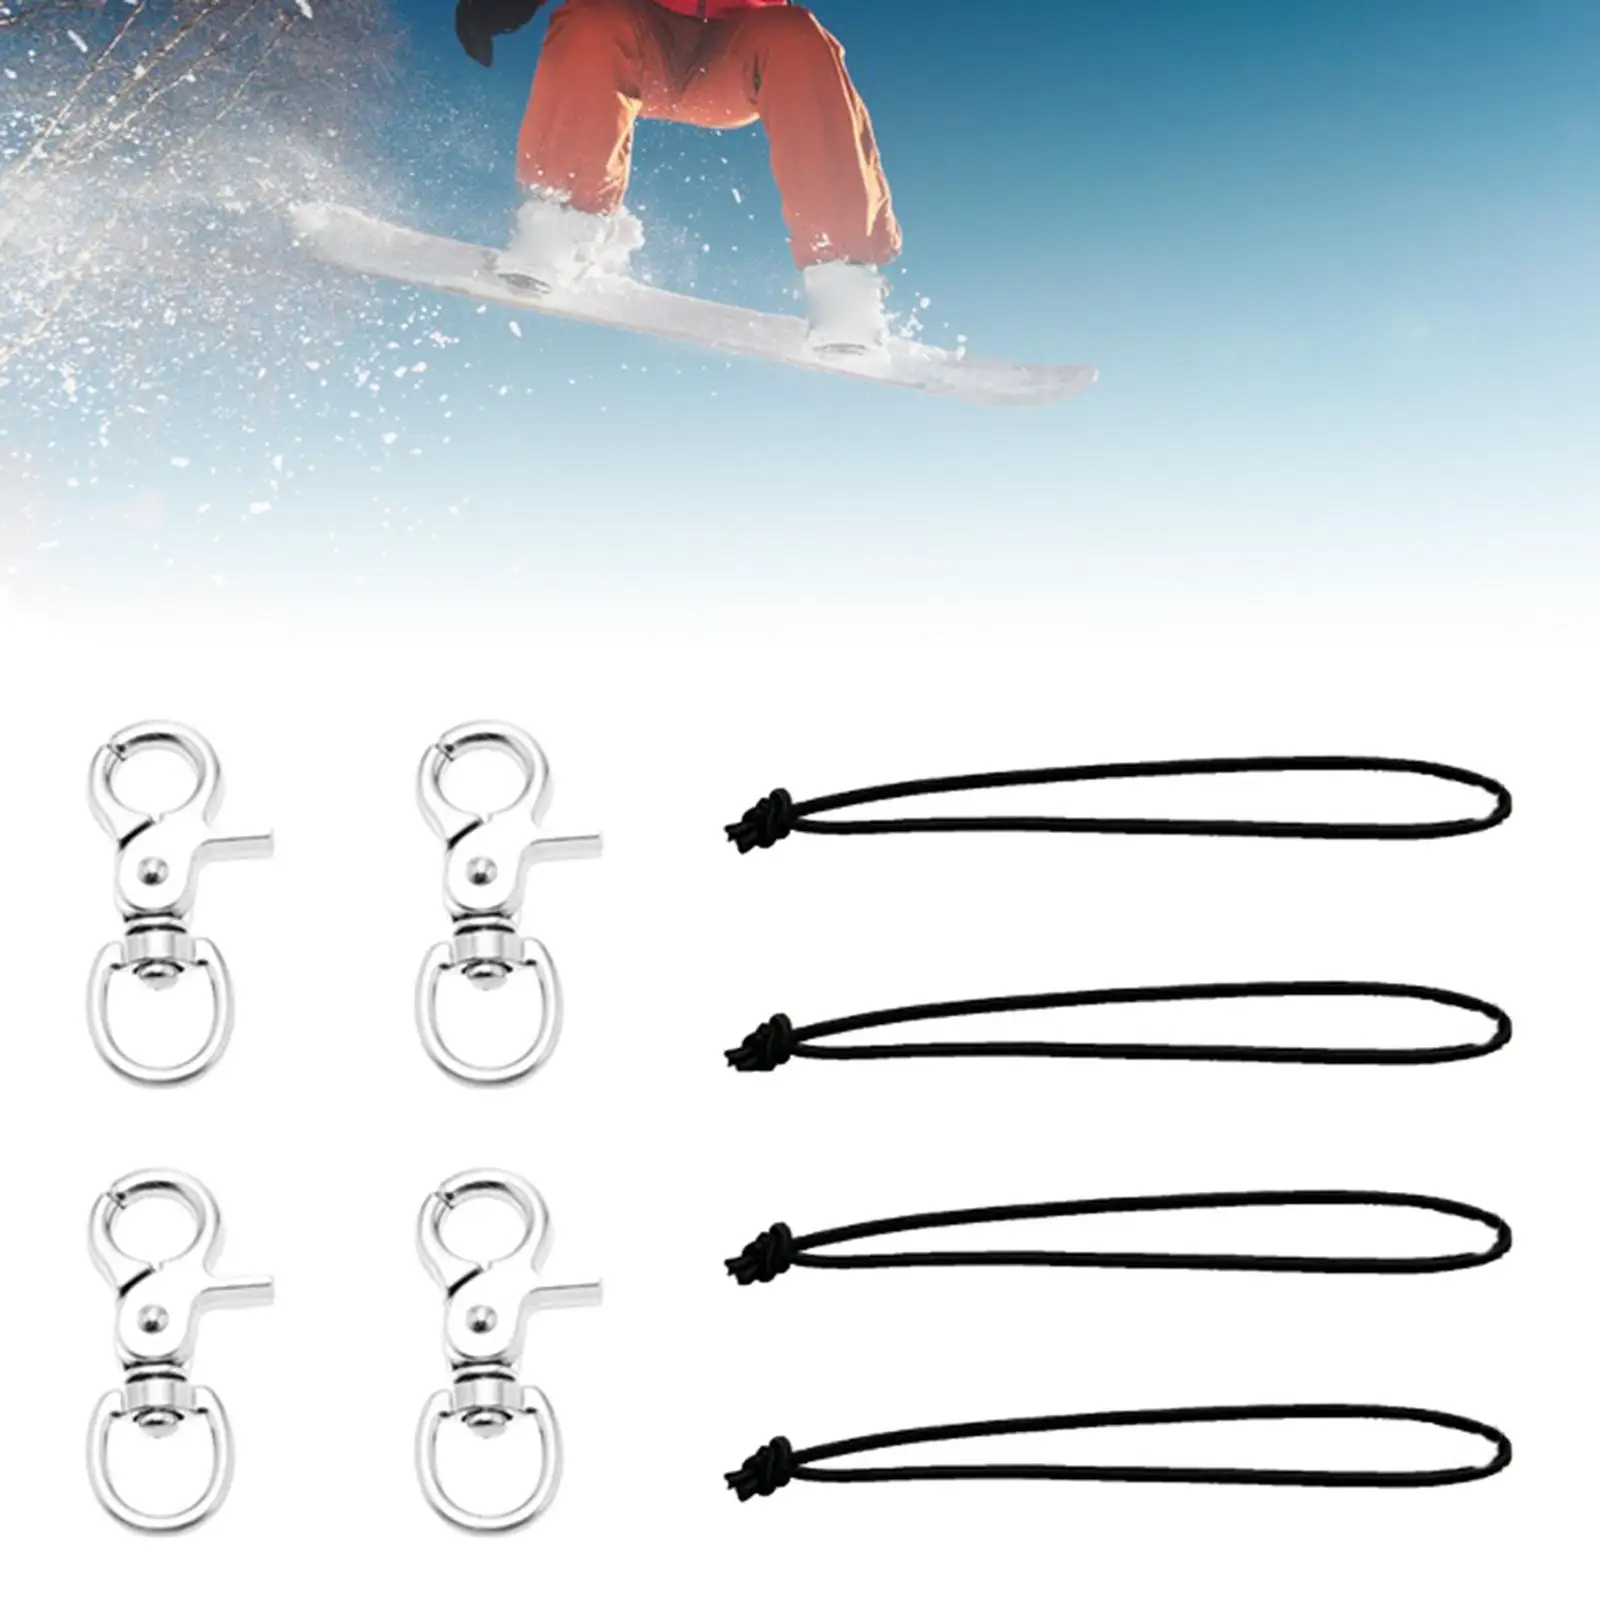 4x Practical Snowboard Leash Cord Multifunctional Tents Rope